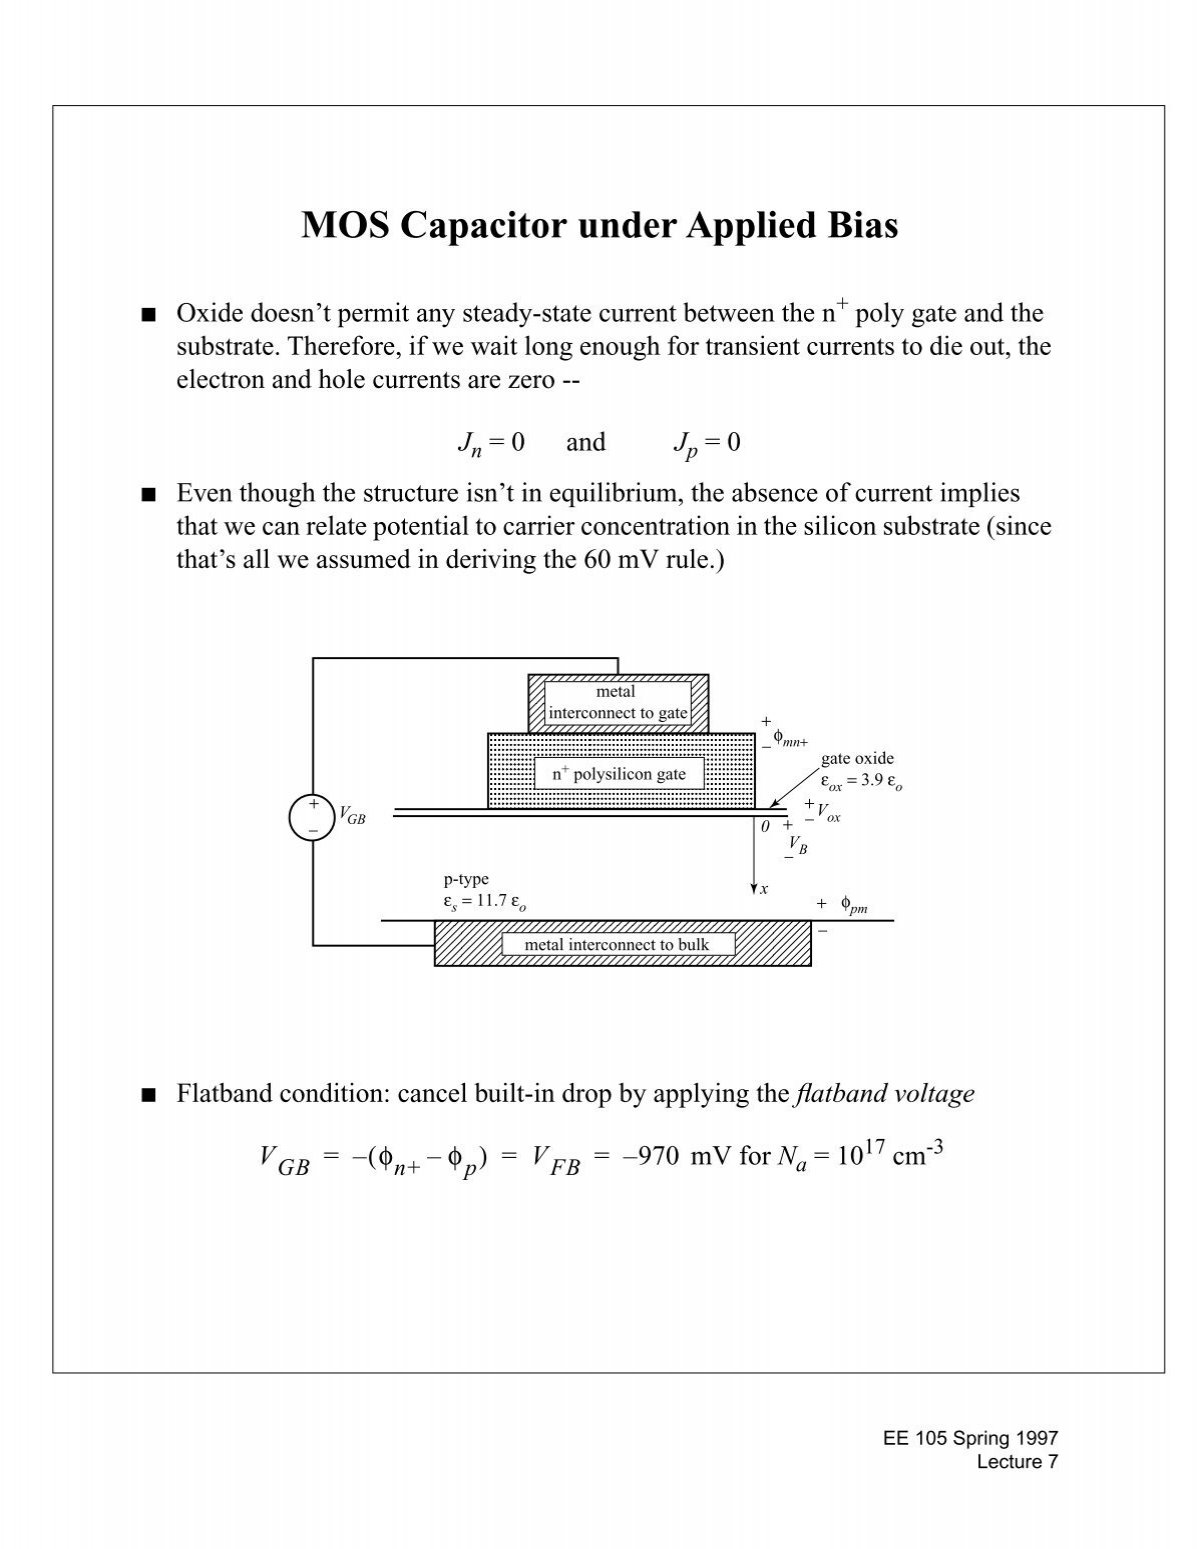 The Inverted Mos Capacitor